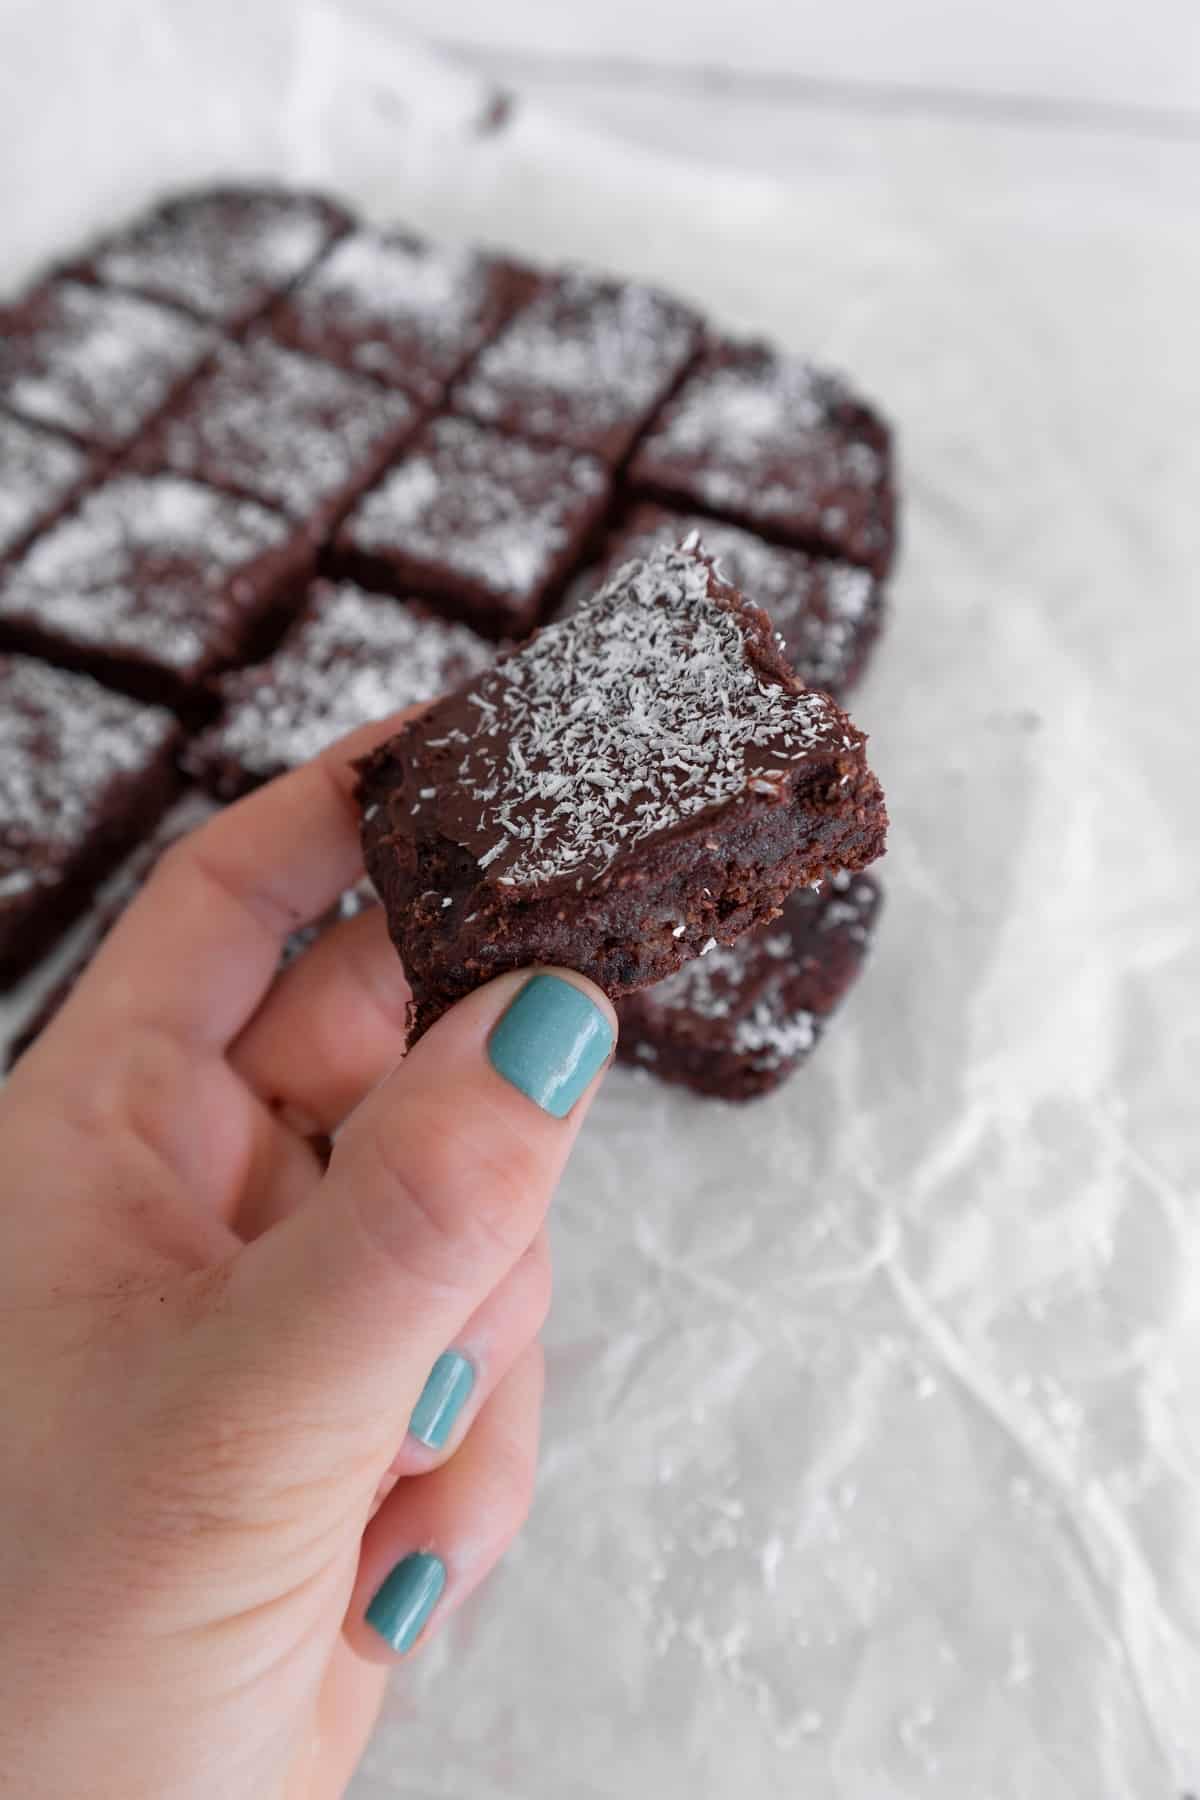 Hand grabbing one square of chocolate coconut slice